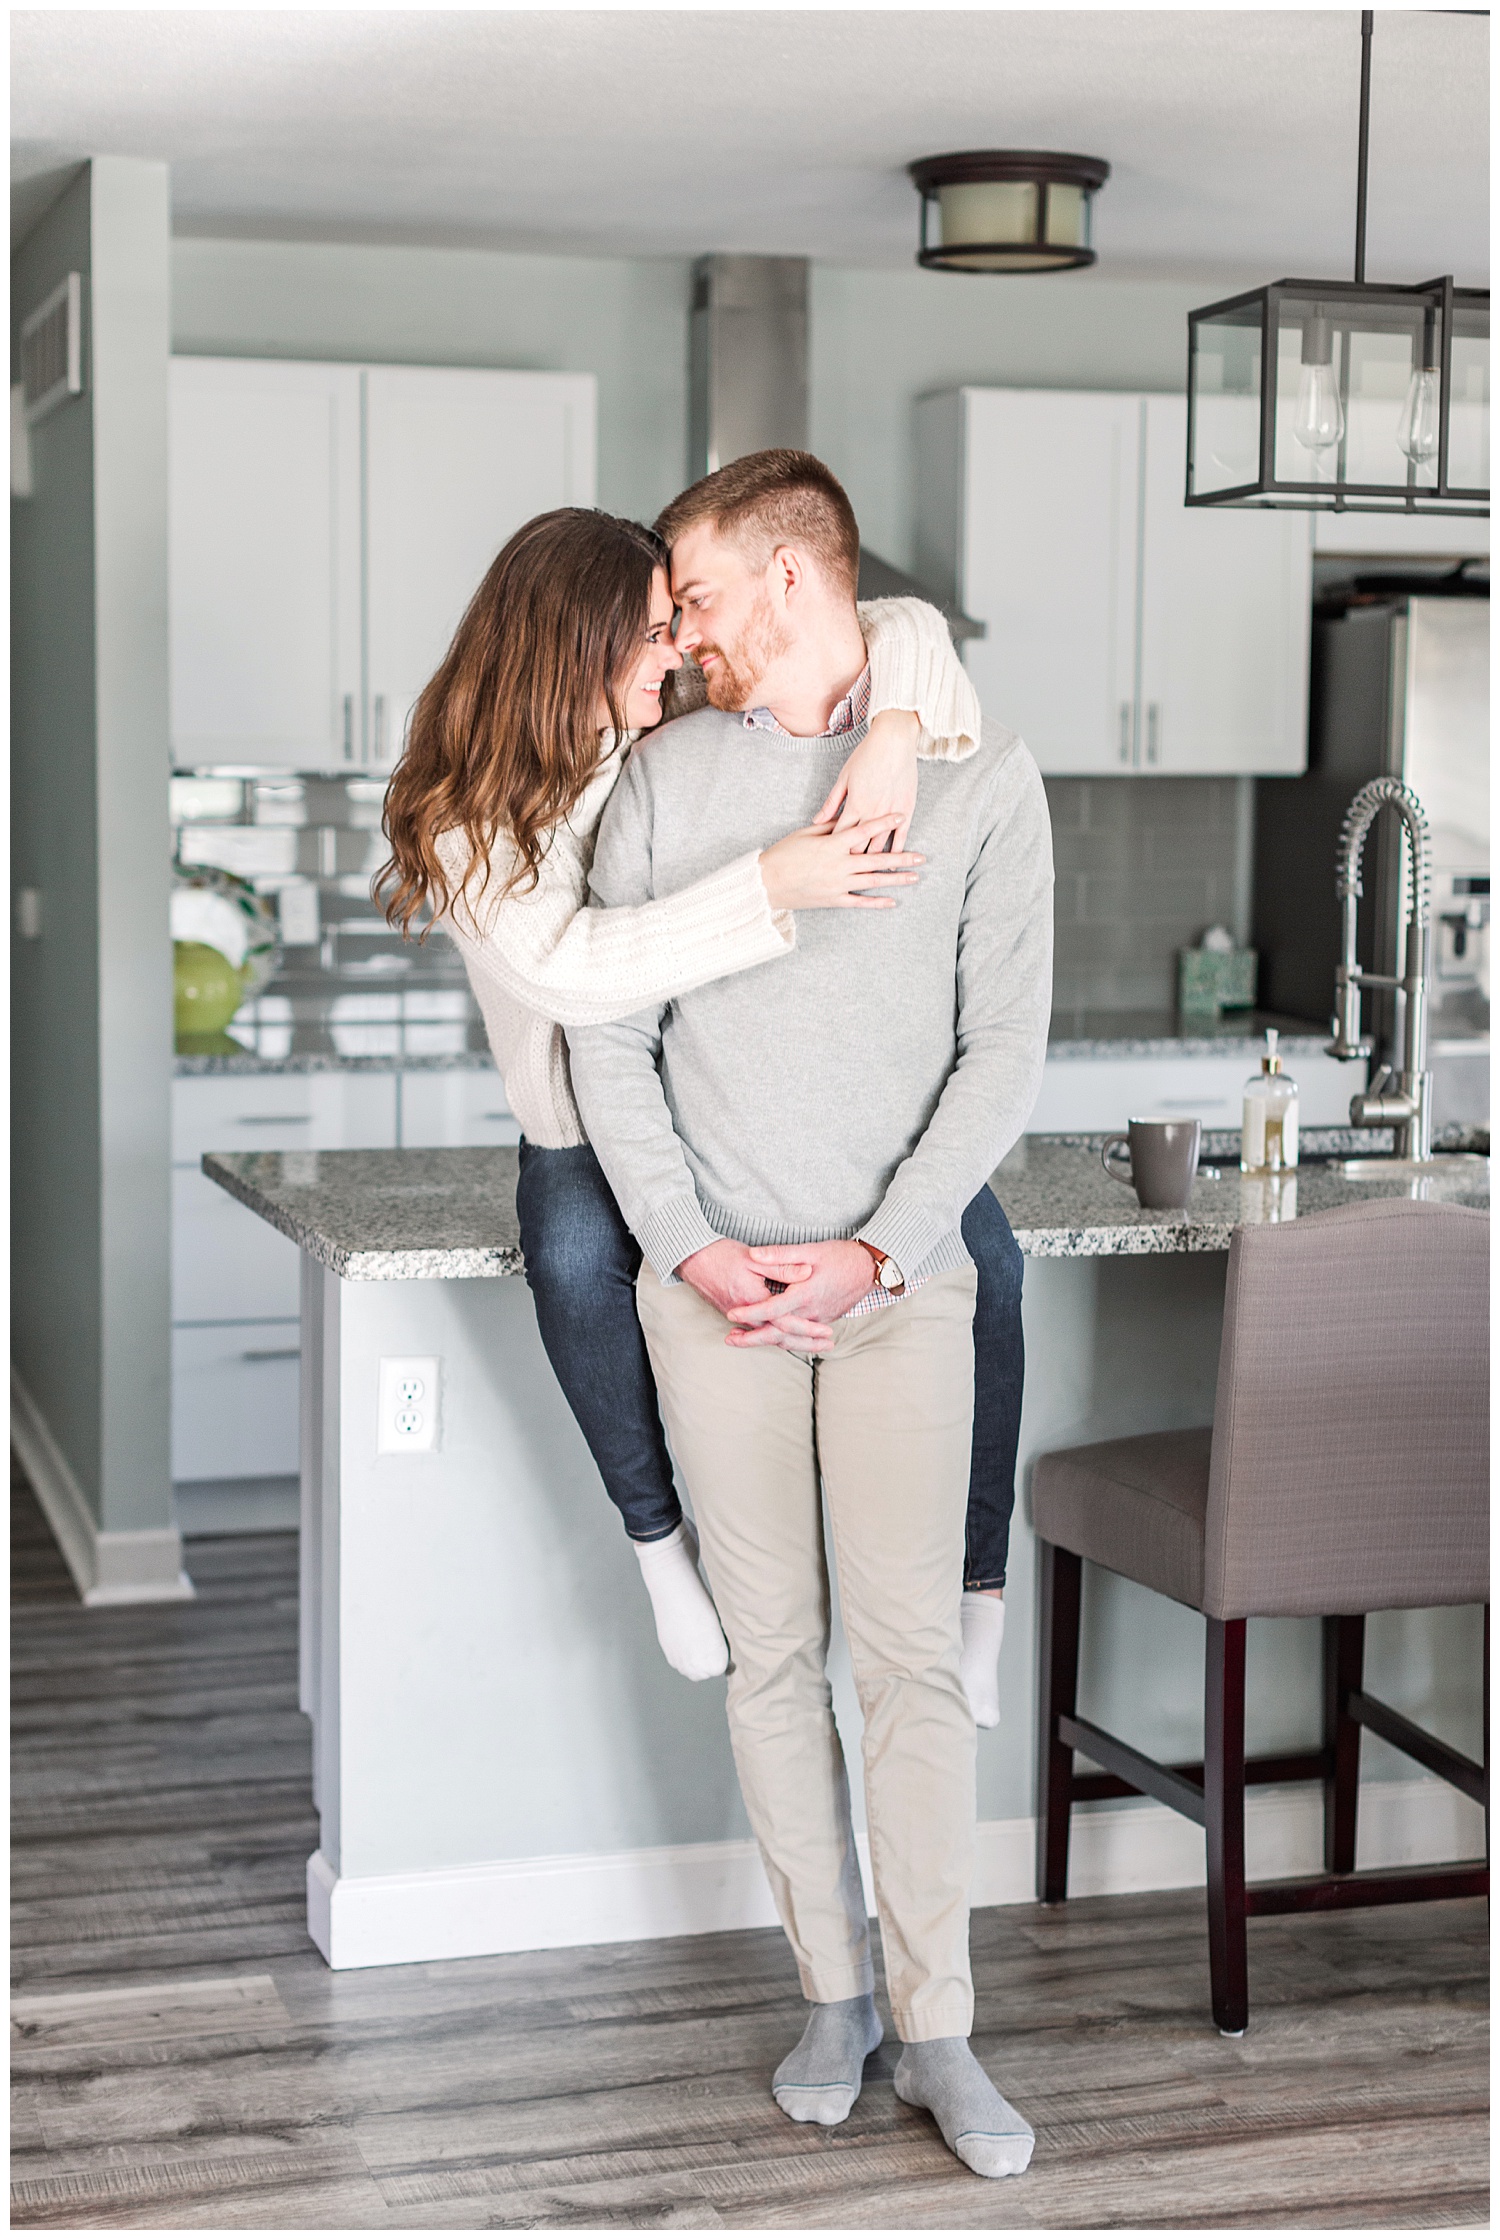 Jenna embraces Dustin while nuzzling together on their kitchen counter | Cozy Kitchen Engagement Session | CB Studio